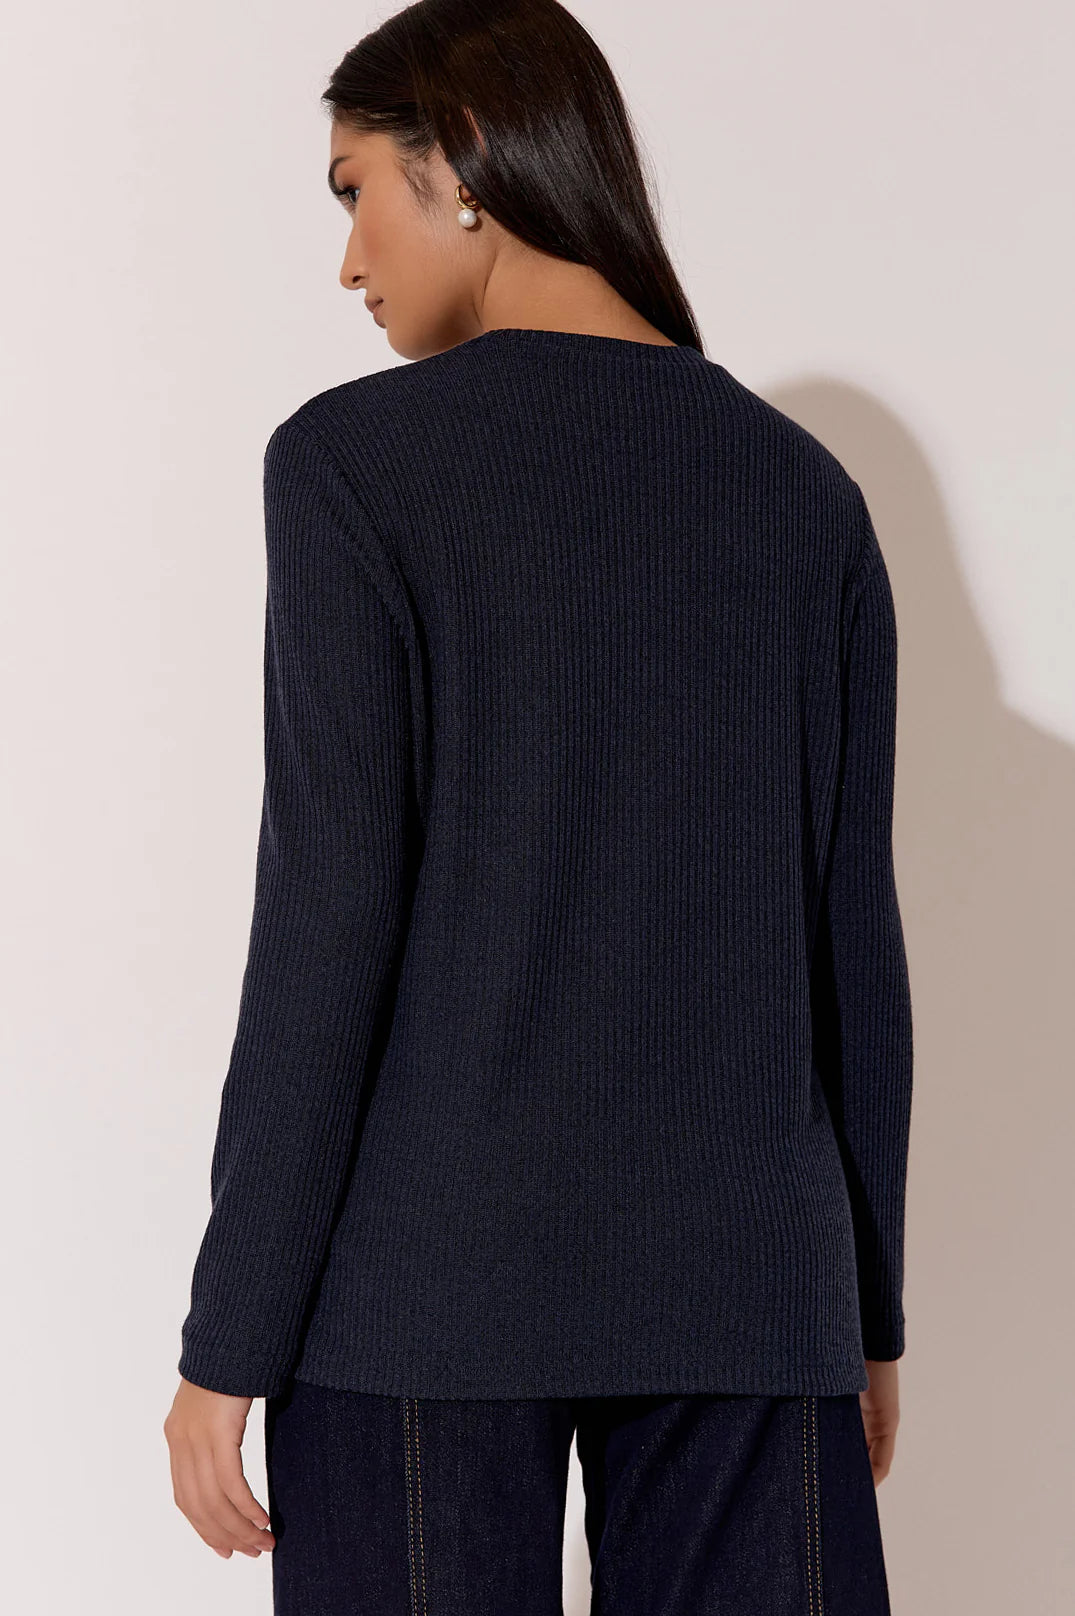 Brielle Knit Top- Navy